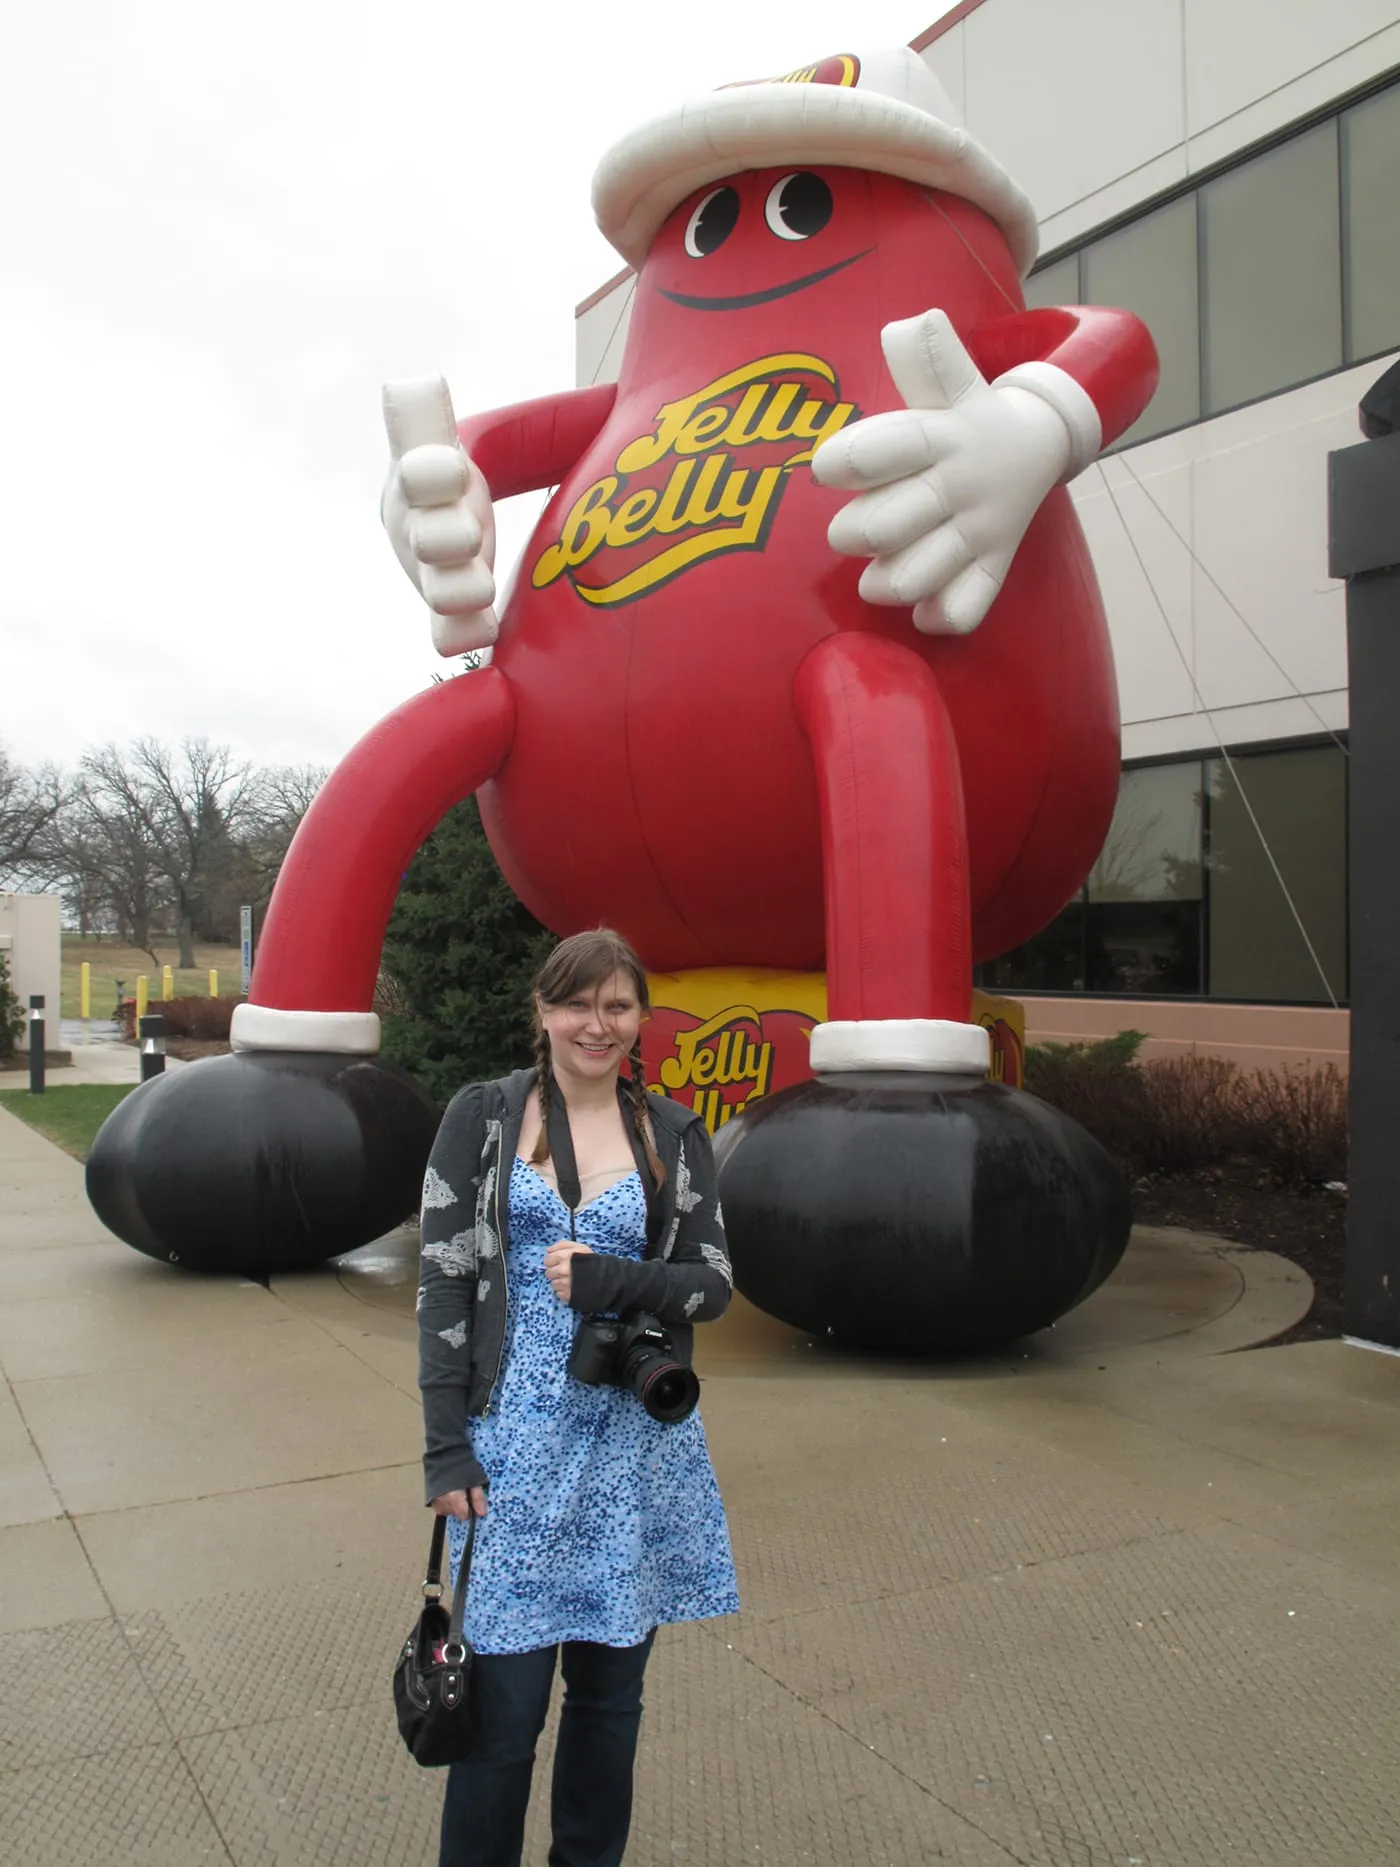 Val and the giant inflatable Jelly Belly at the Jelly Belly Tour in Pleasant Prairie, Wisconsin